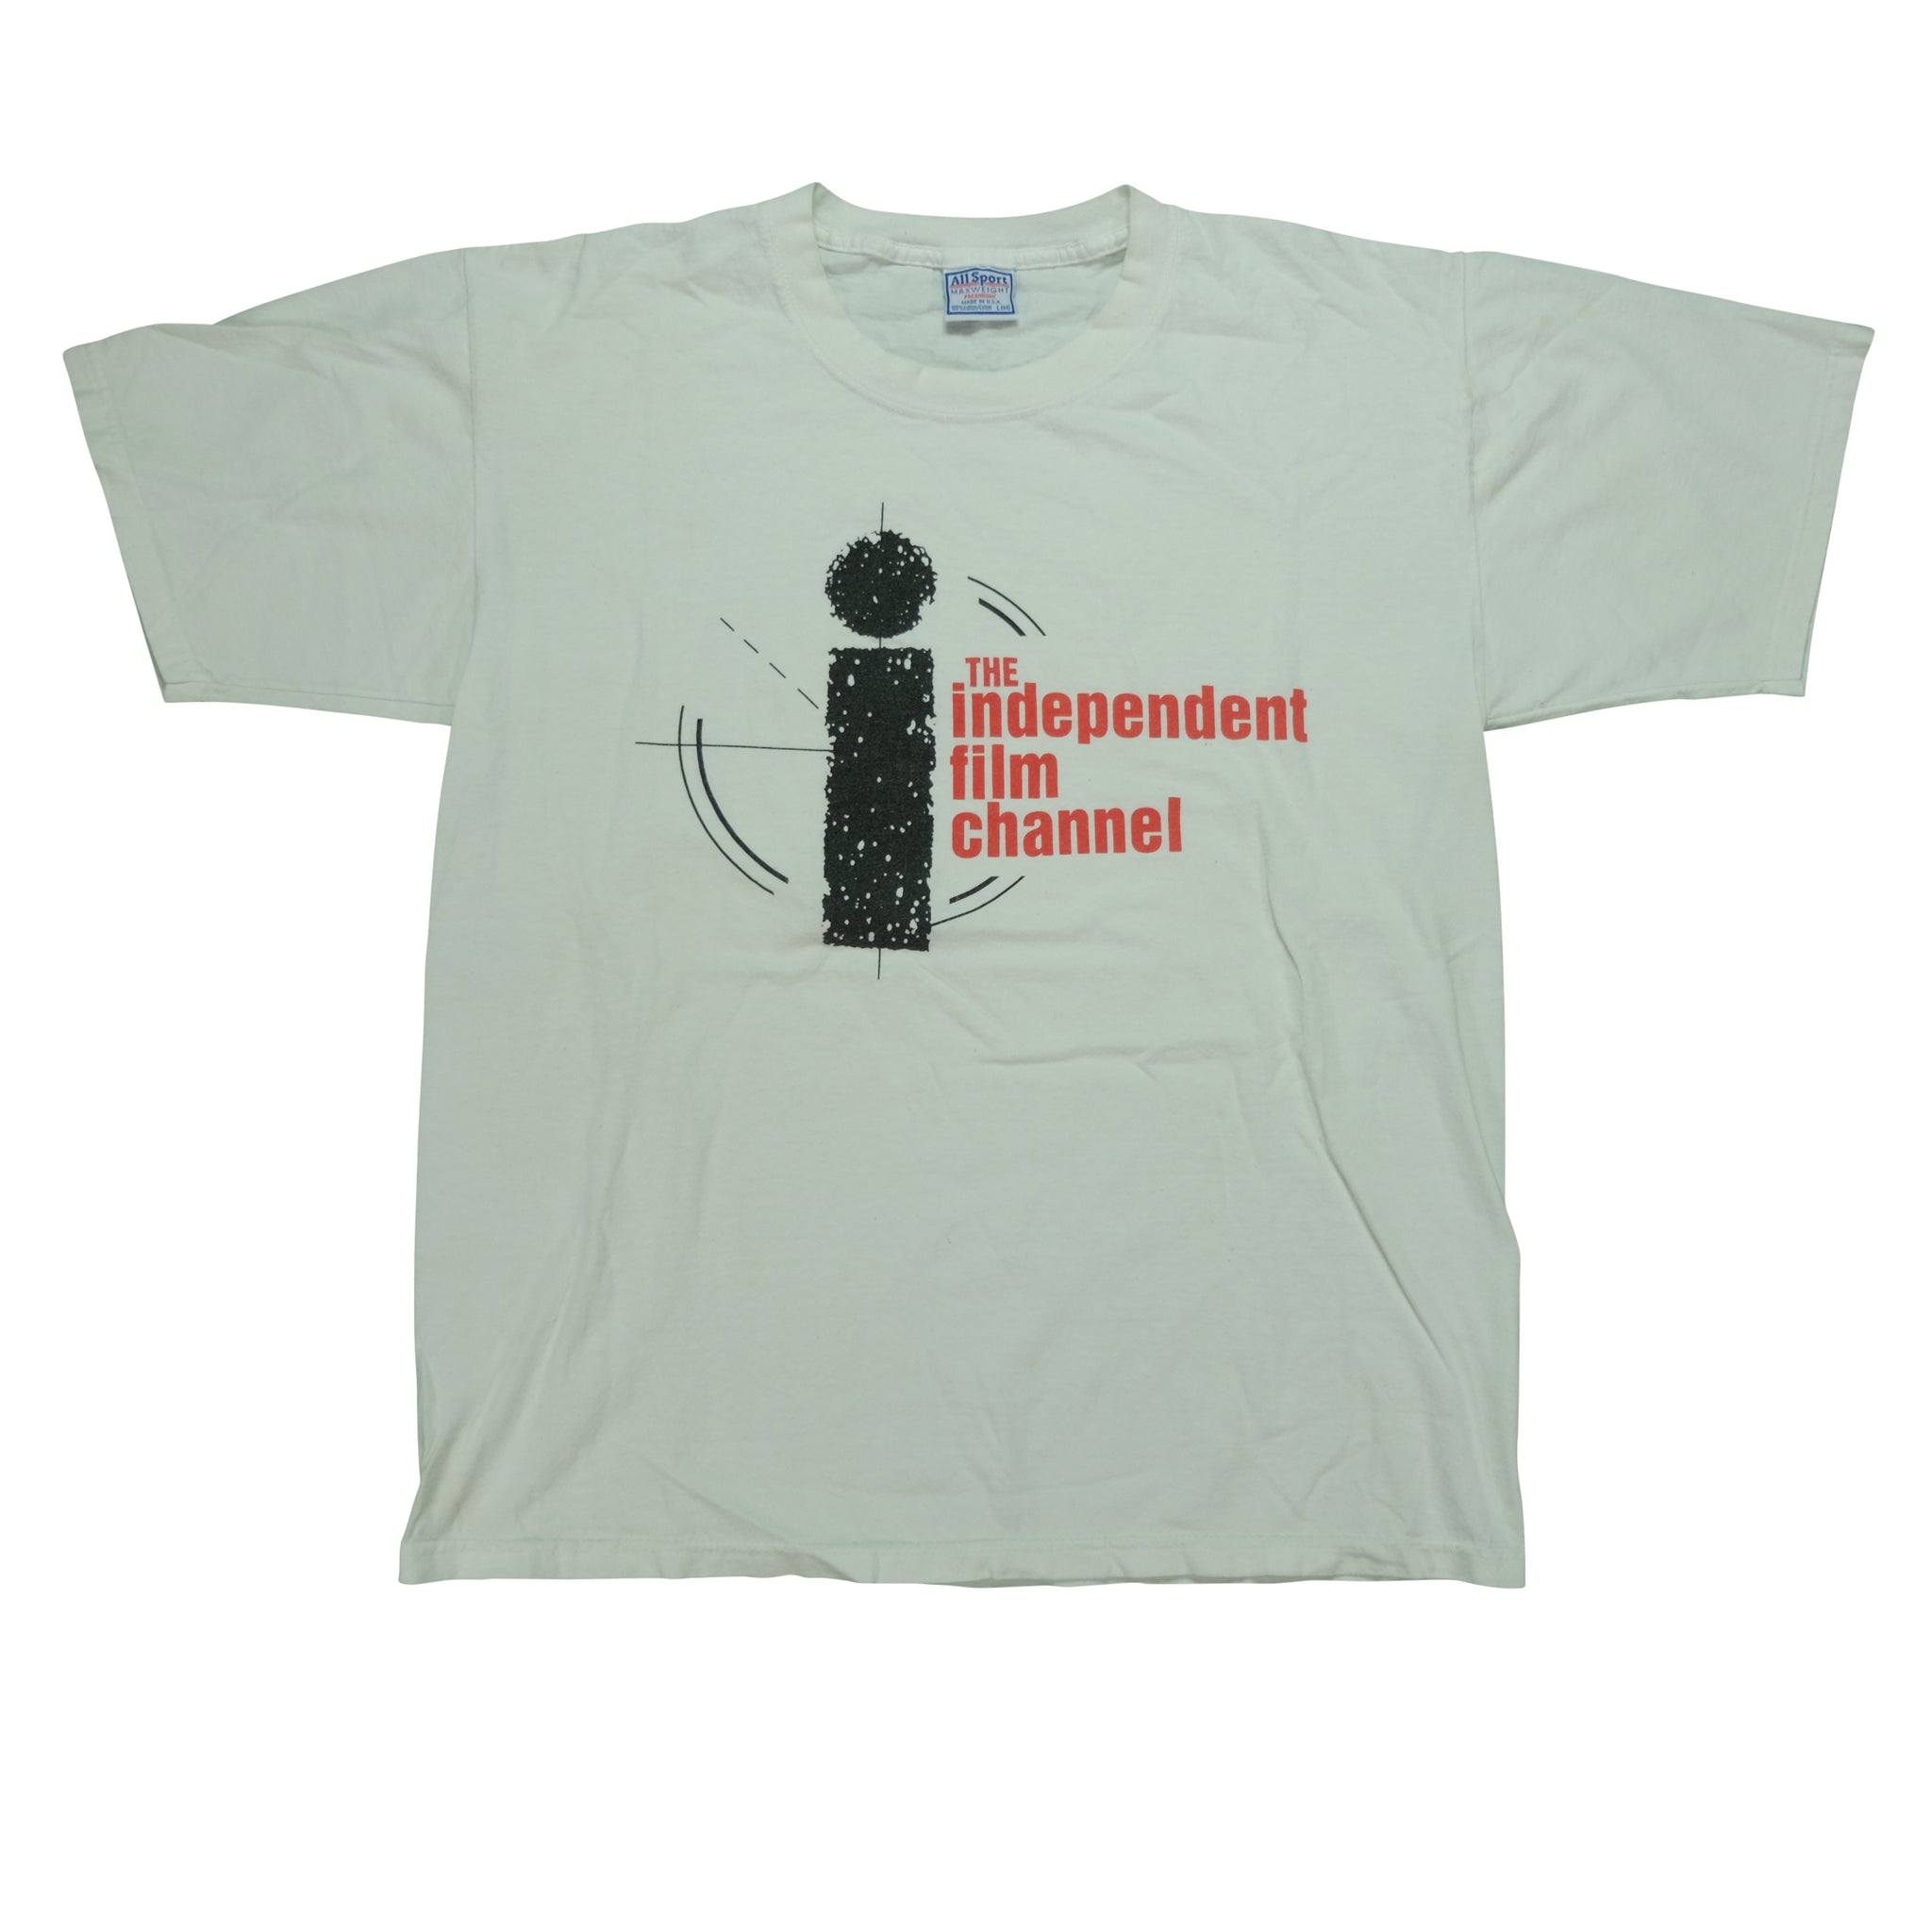 Vintage ALL SPORT IFC The Independent Film Channel T Shirt 90s